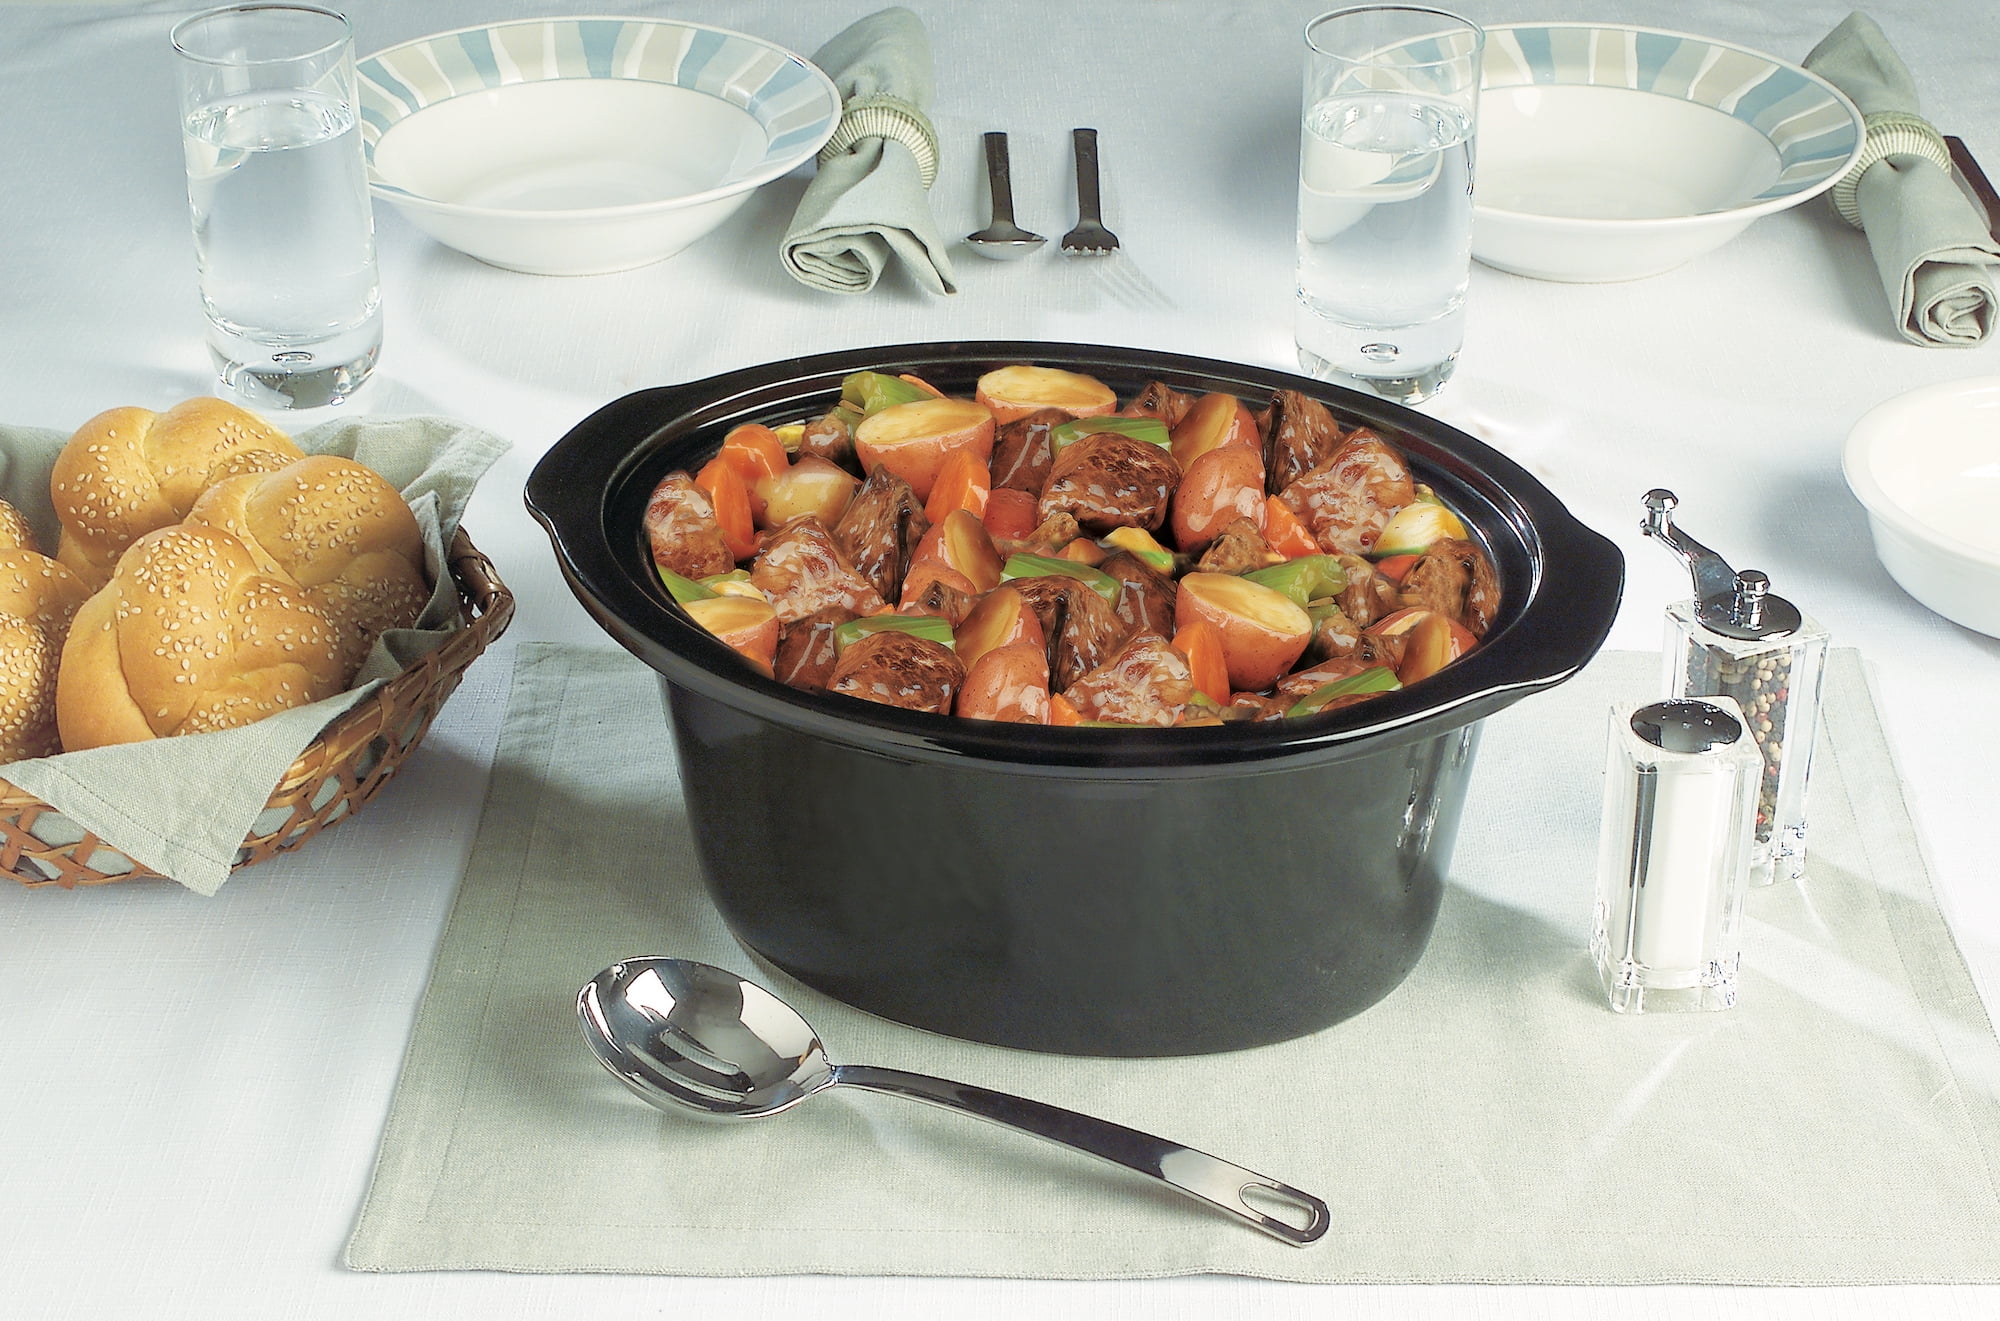 Crock-Pot 8-Quart Stainless Steel Round Slow Cooker in the Slow